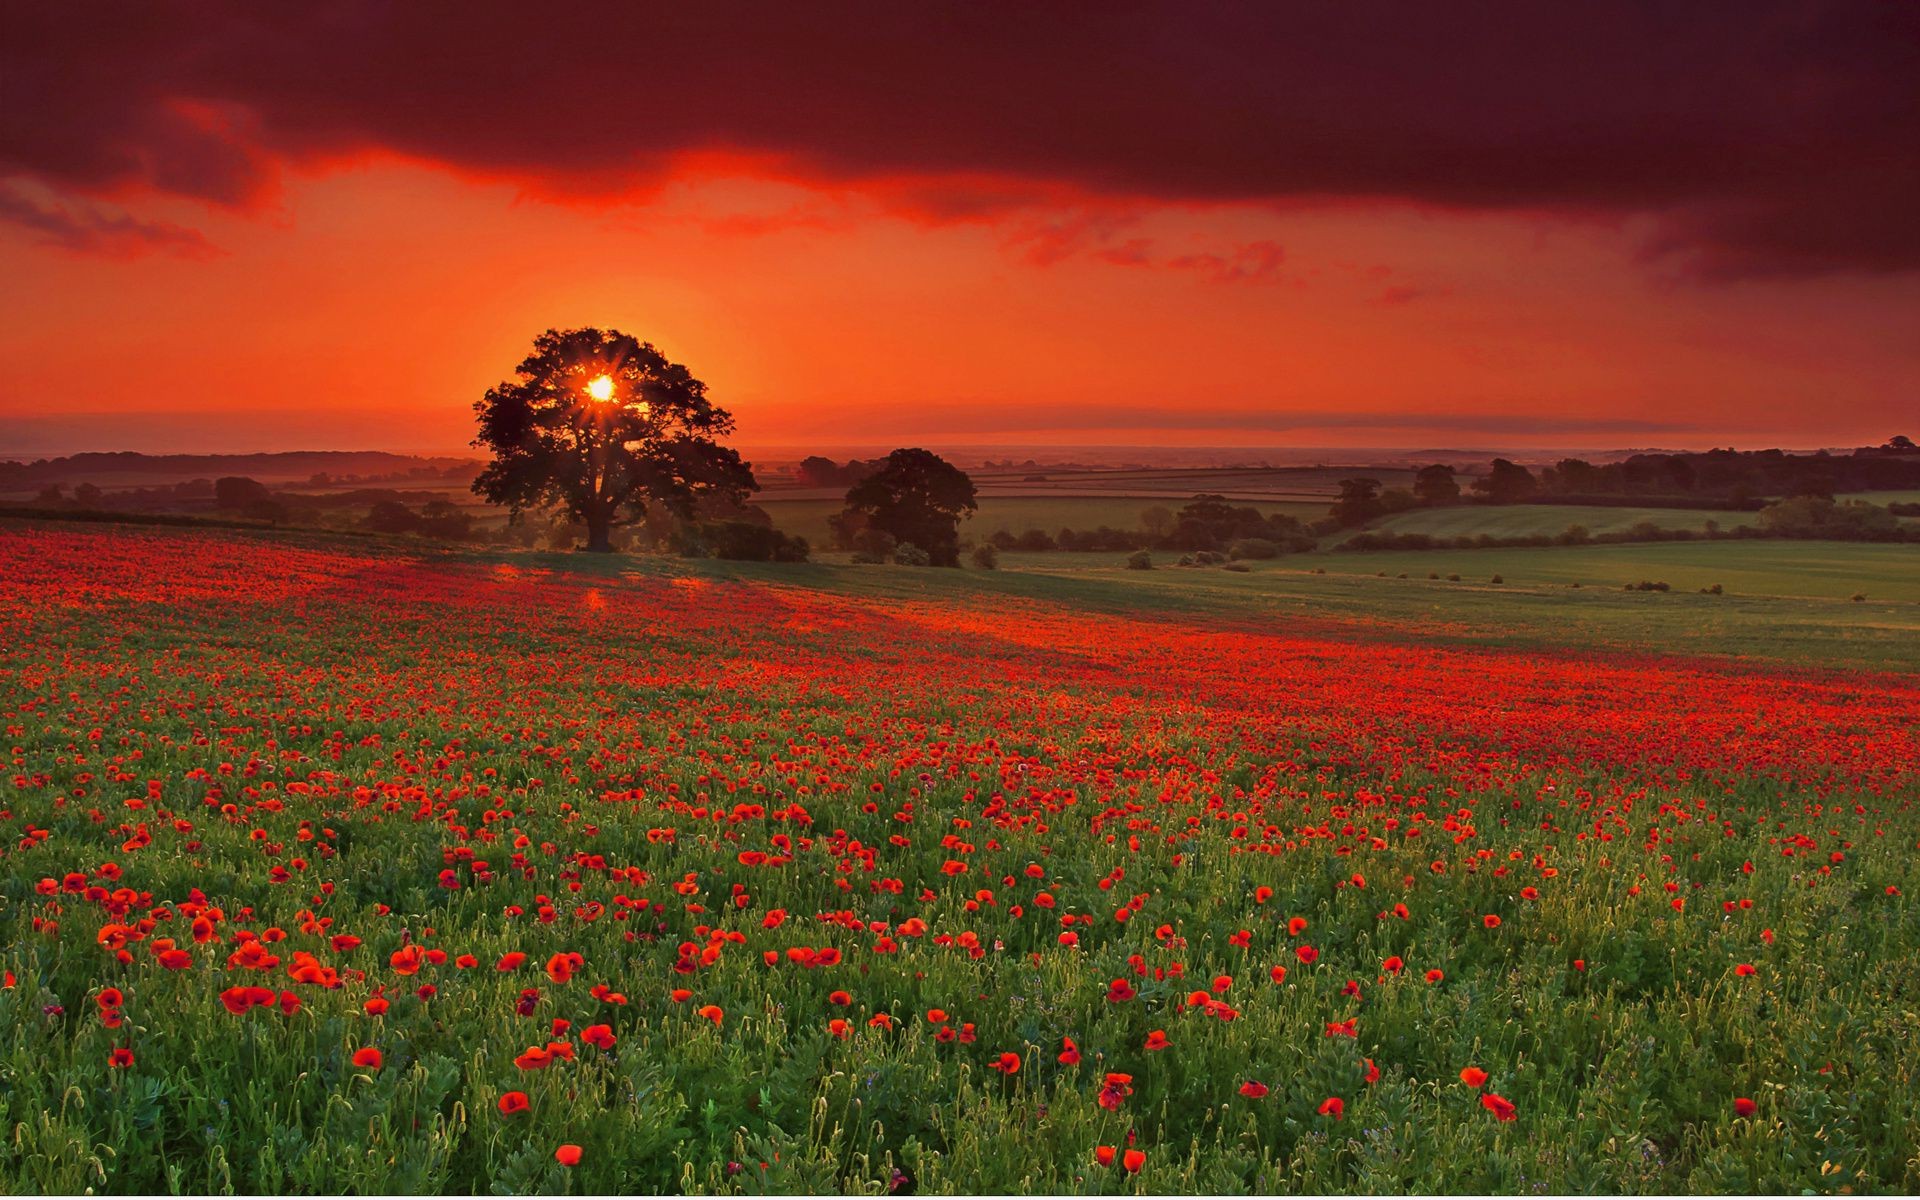 the sunset and sunrise poppy flower field landscape rural agriculture grassland countryside hayfield nature outdoors grass cropland sky sun farm summer dawn pasture